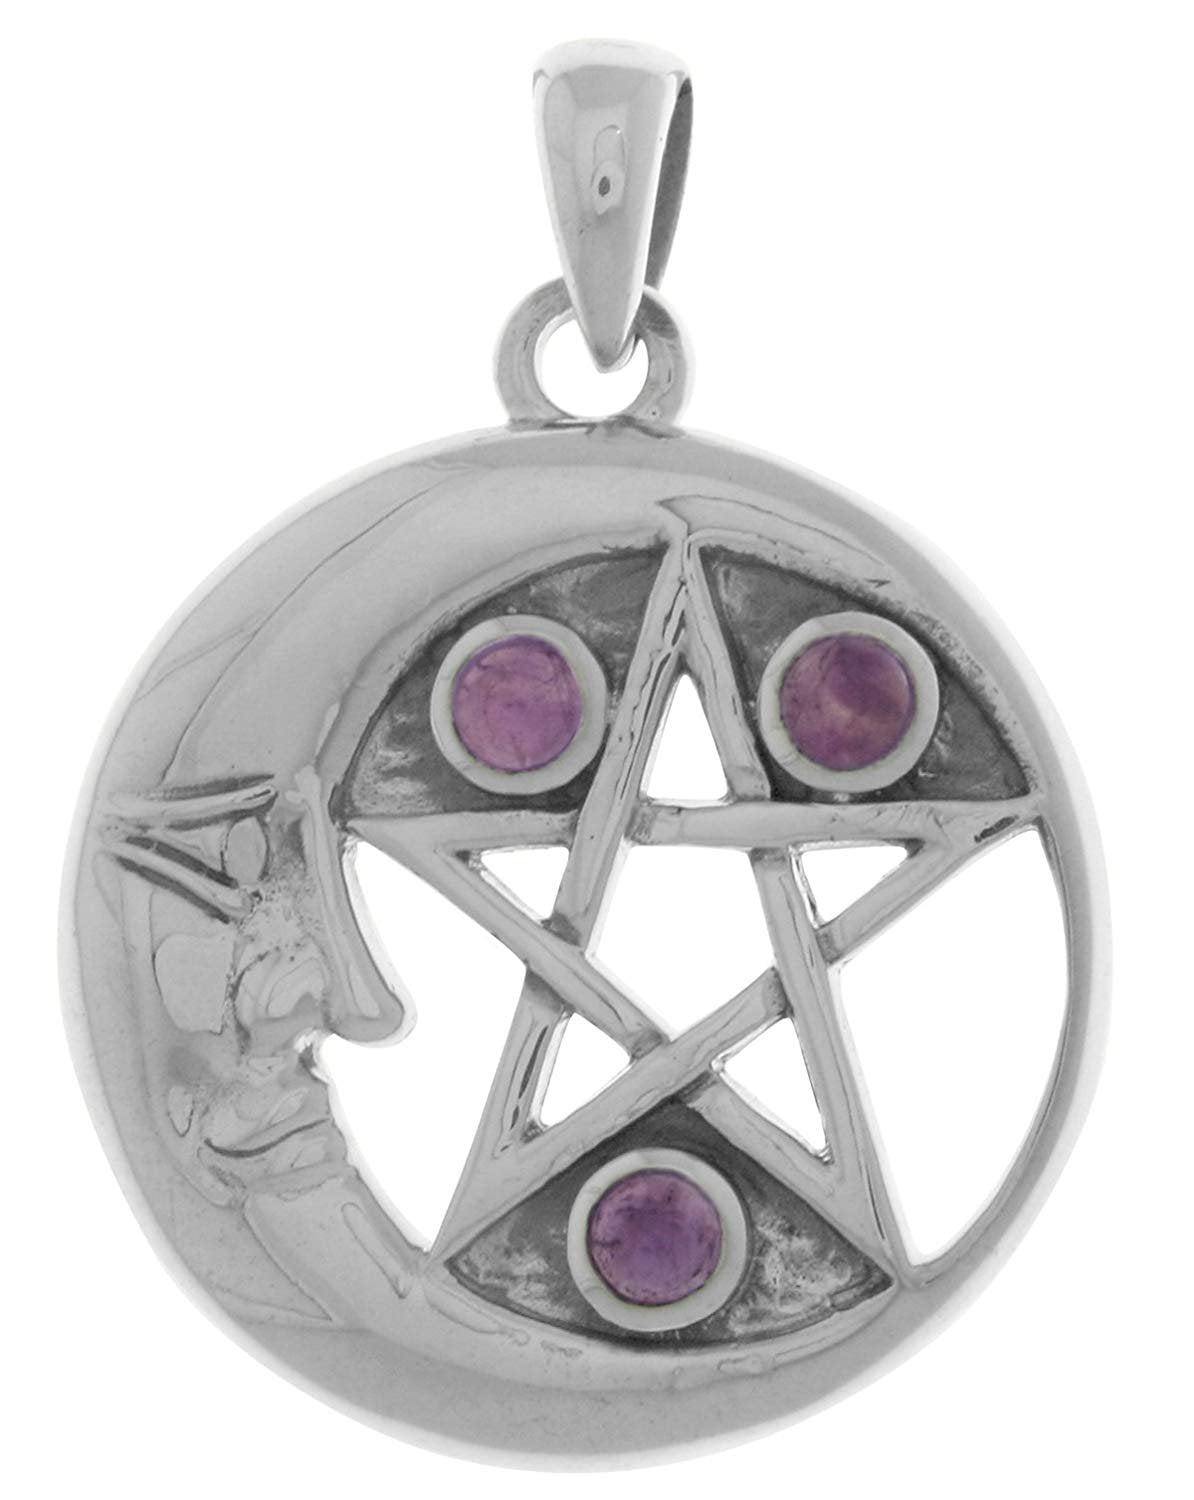 Jewelry Trends Sterling Silver Crescent Moon and Star Pentacle Pendant with Amethyst